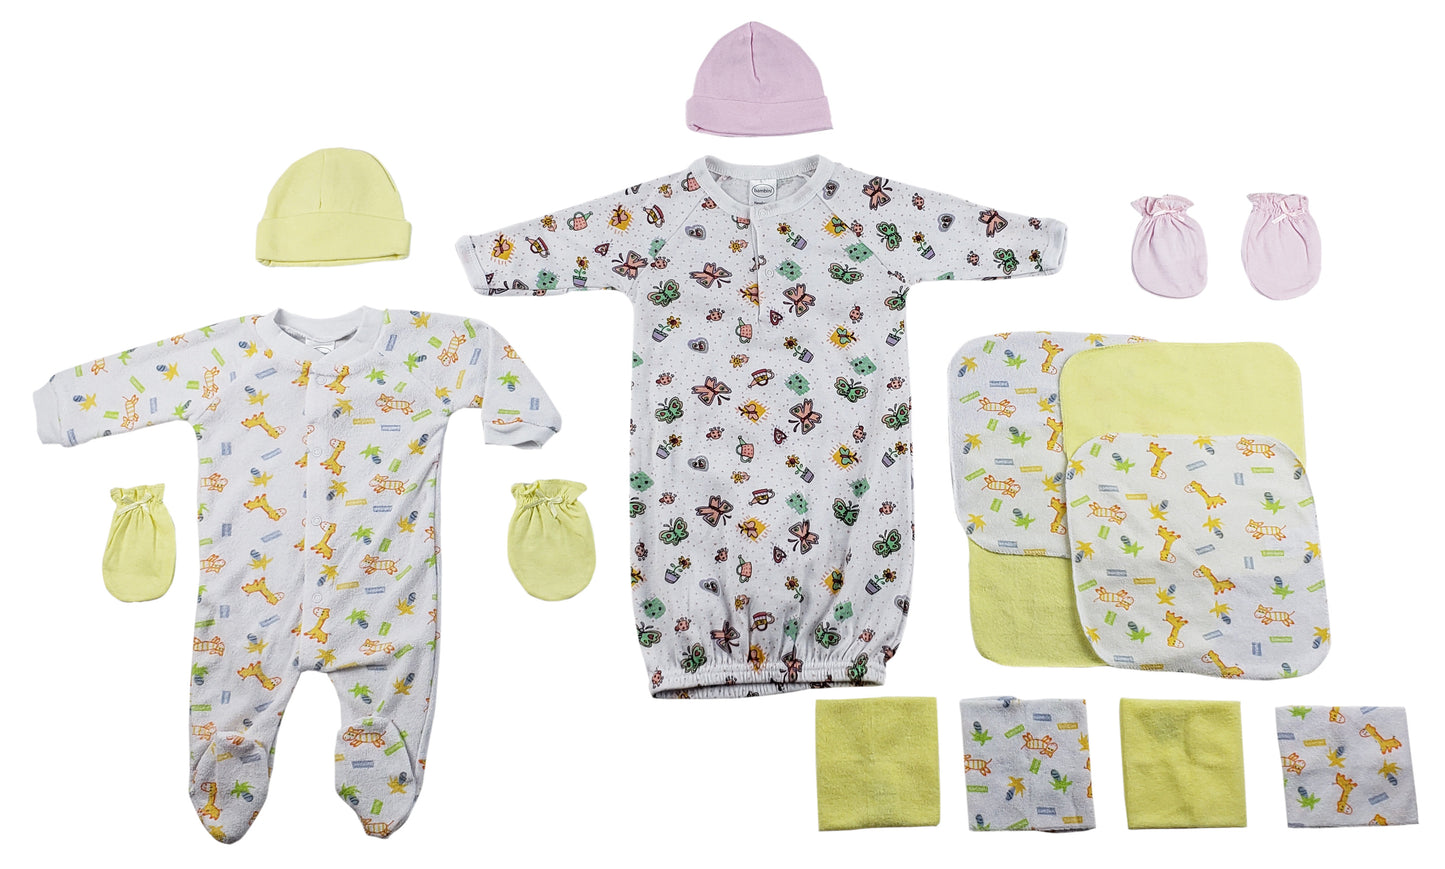 Sleep-n-Play, Gown, Caps, Mittens and Washcloths - 14 pc Set CS_0040